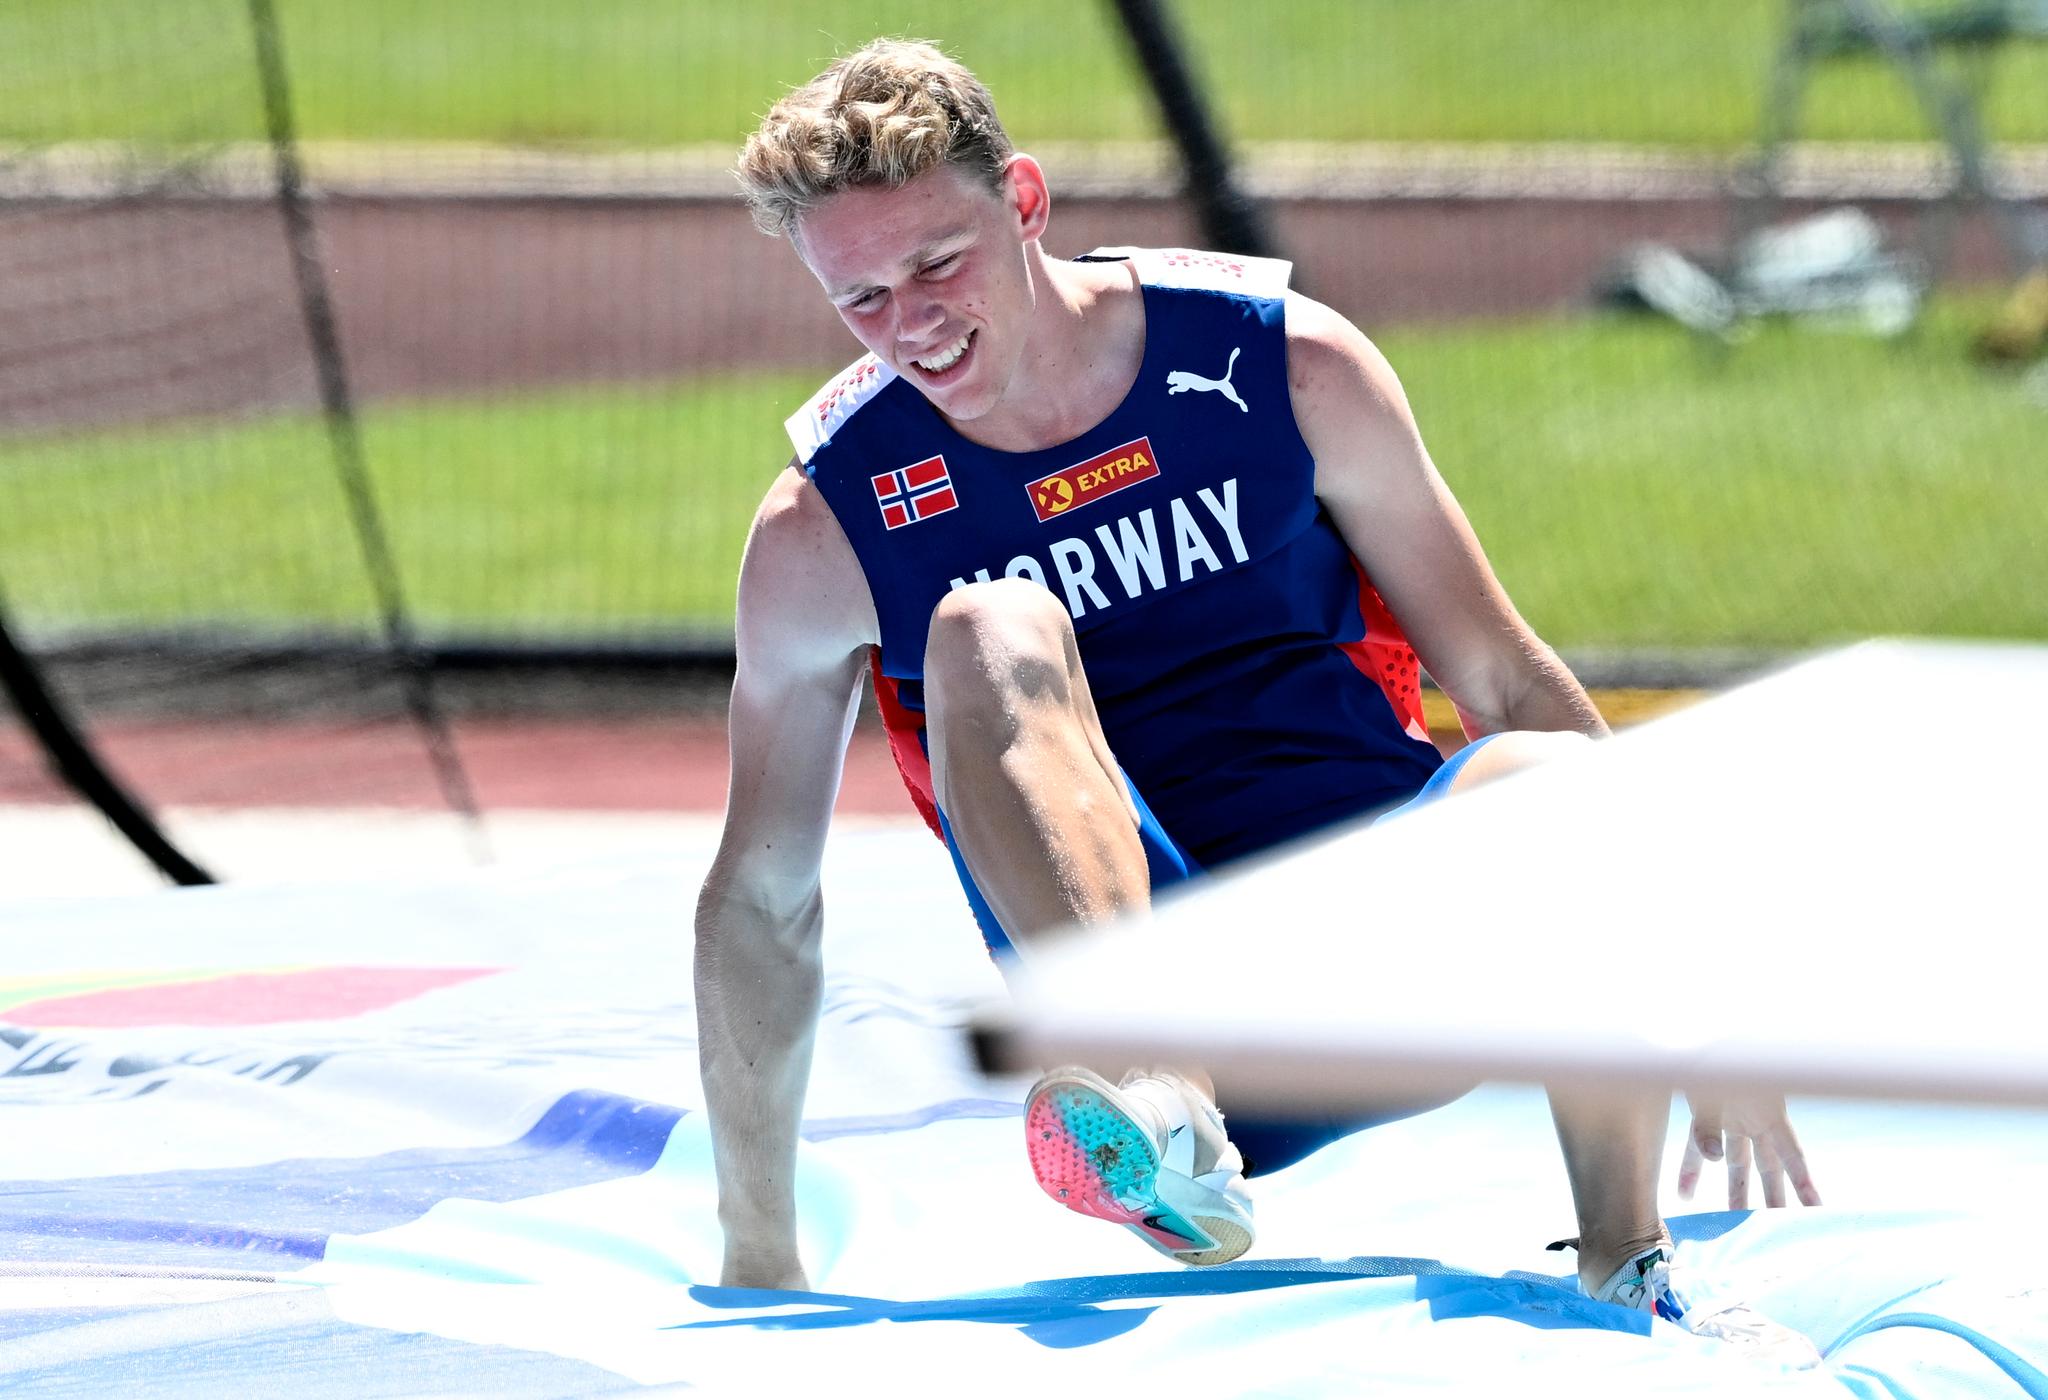 The beginner at WC Skotheim in 15th place in the decathlon